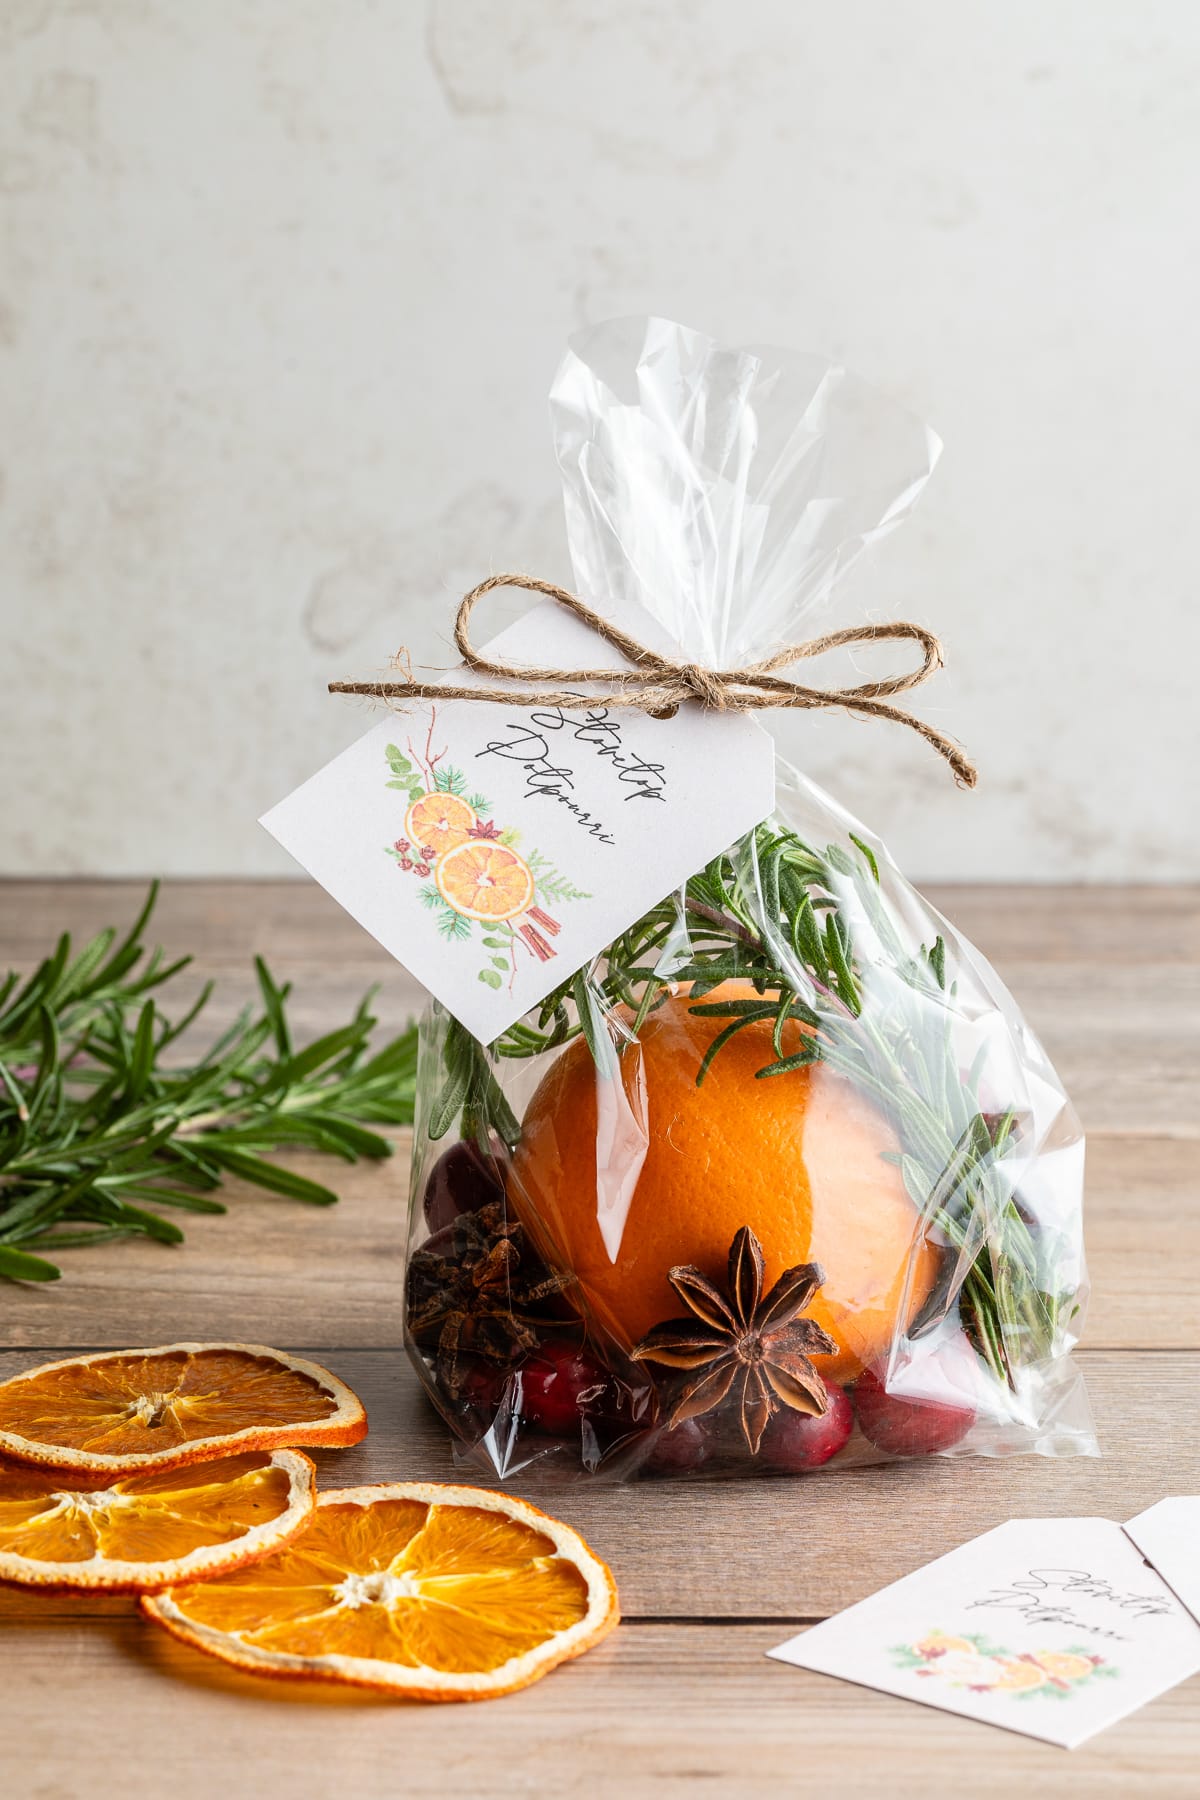 Cellophane gift bag filled with orange, cranberries, and spices shown with gift tag that says "Stovetop Potpourri" next to dried orange slices.